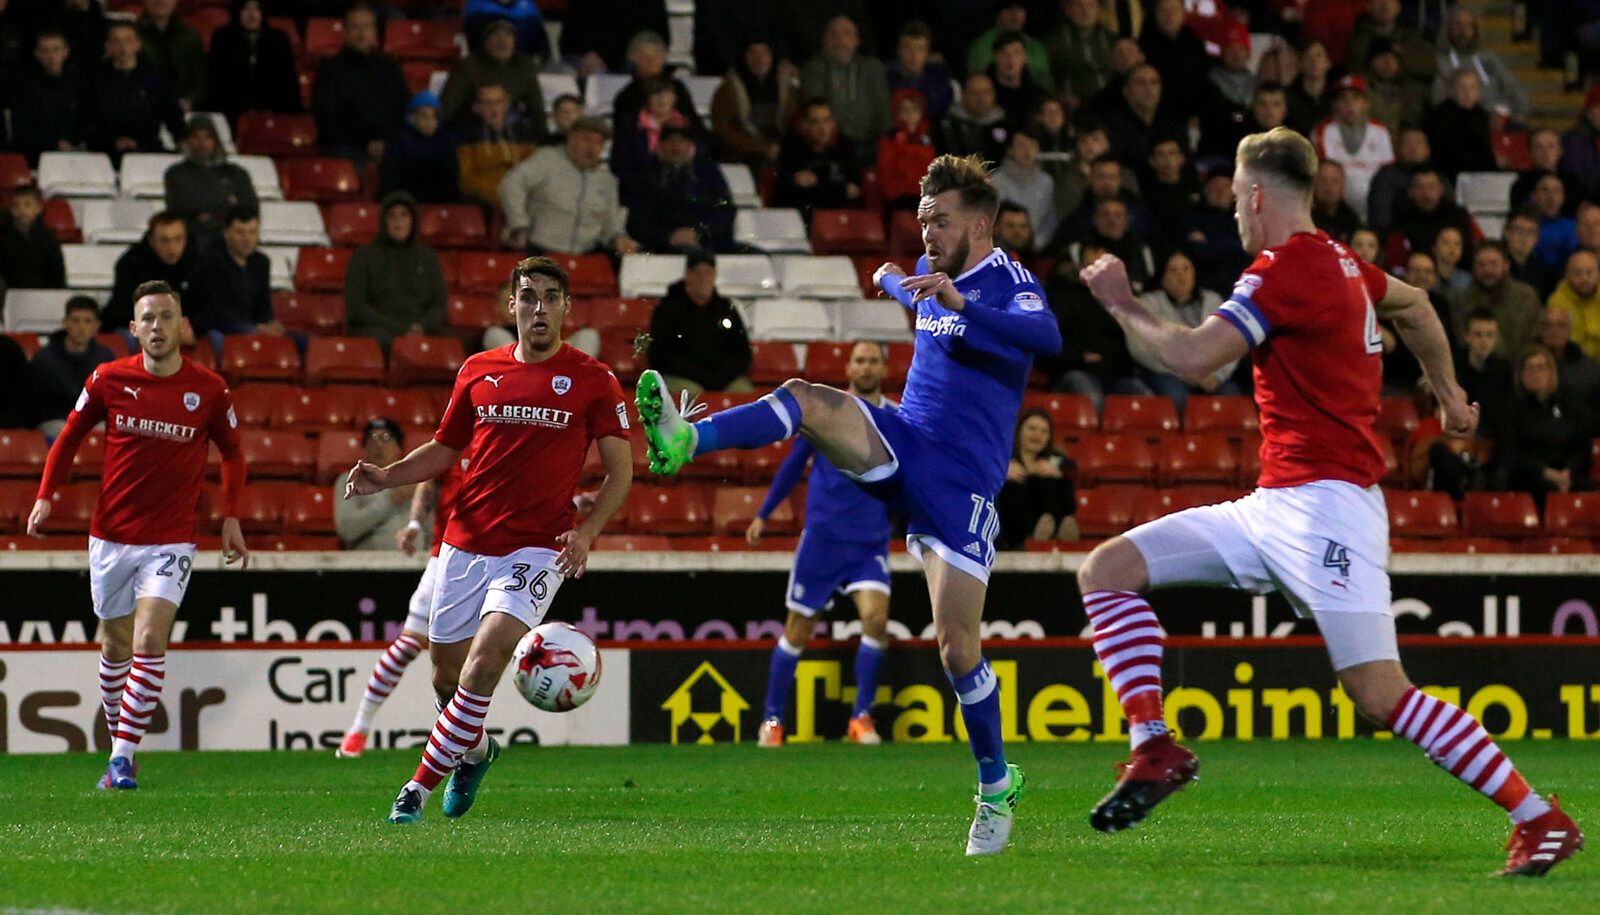 Britain Football Soccer - Barnsley v Cardiff City - Sky Bet Championship - Oakwell - 4/4/17 Cardiff City's Craig Noone has an attempt on goal Mandatory Credit: Action Images / Craig Brough Livepic EDITORIAL USE ONLY. No use with unauthorized audio, video, data, fixture lists, club/league logos or 